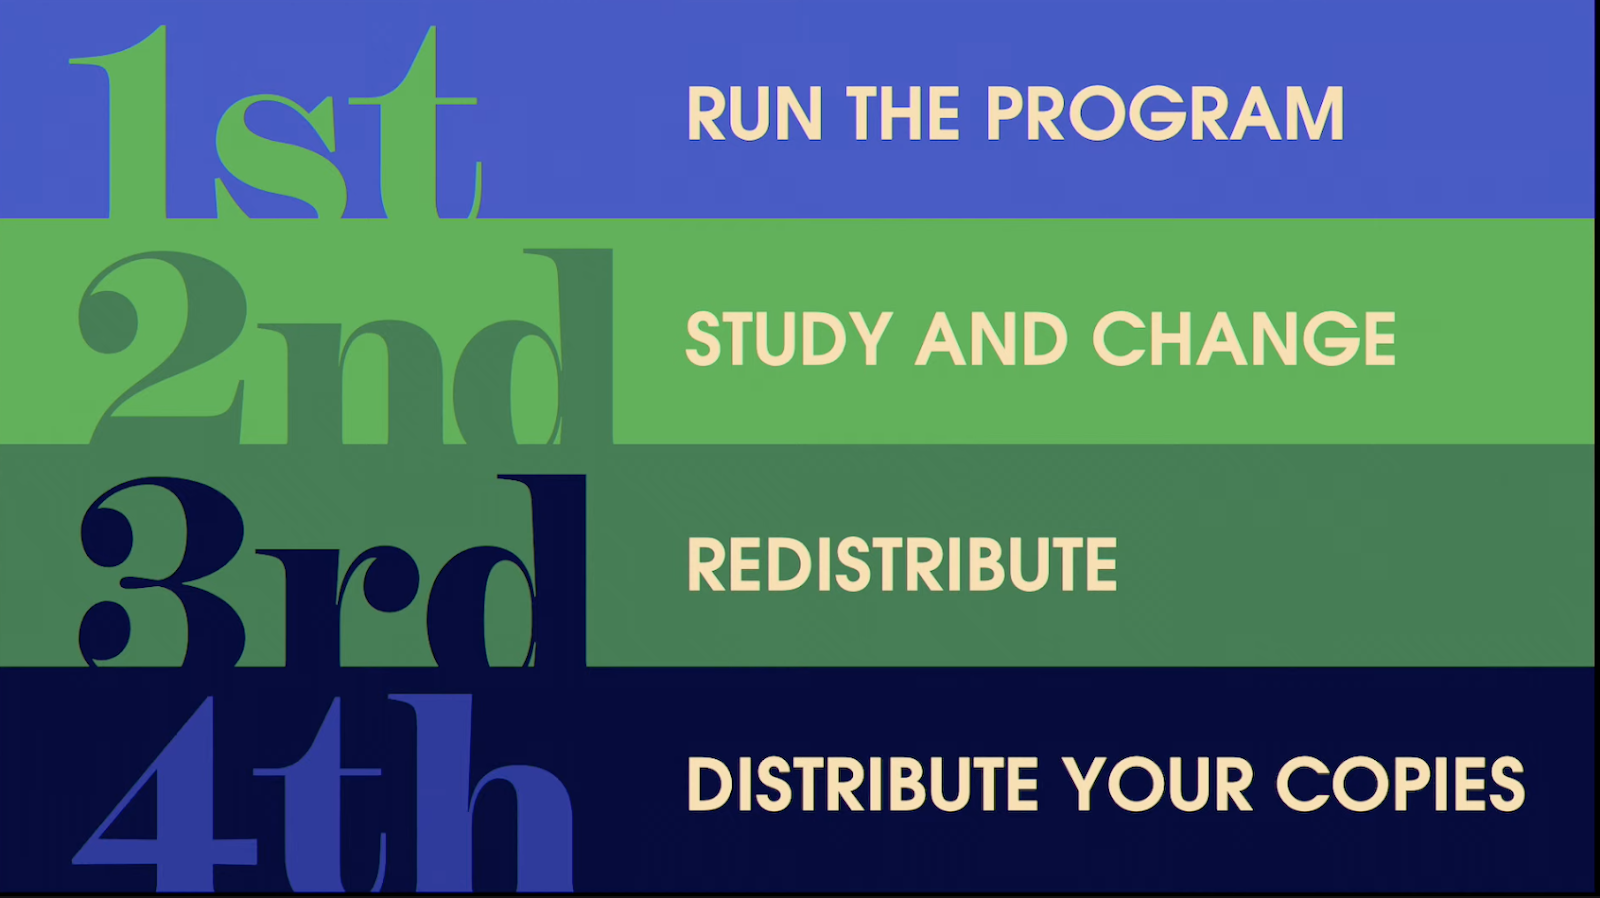 The four freedoms of open source.
1st, Run the program
2nd, Study and Change
3rd, Redistribute
4th, Distribute Your Copies